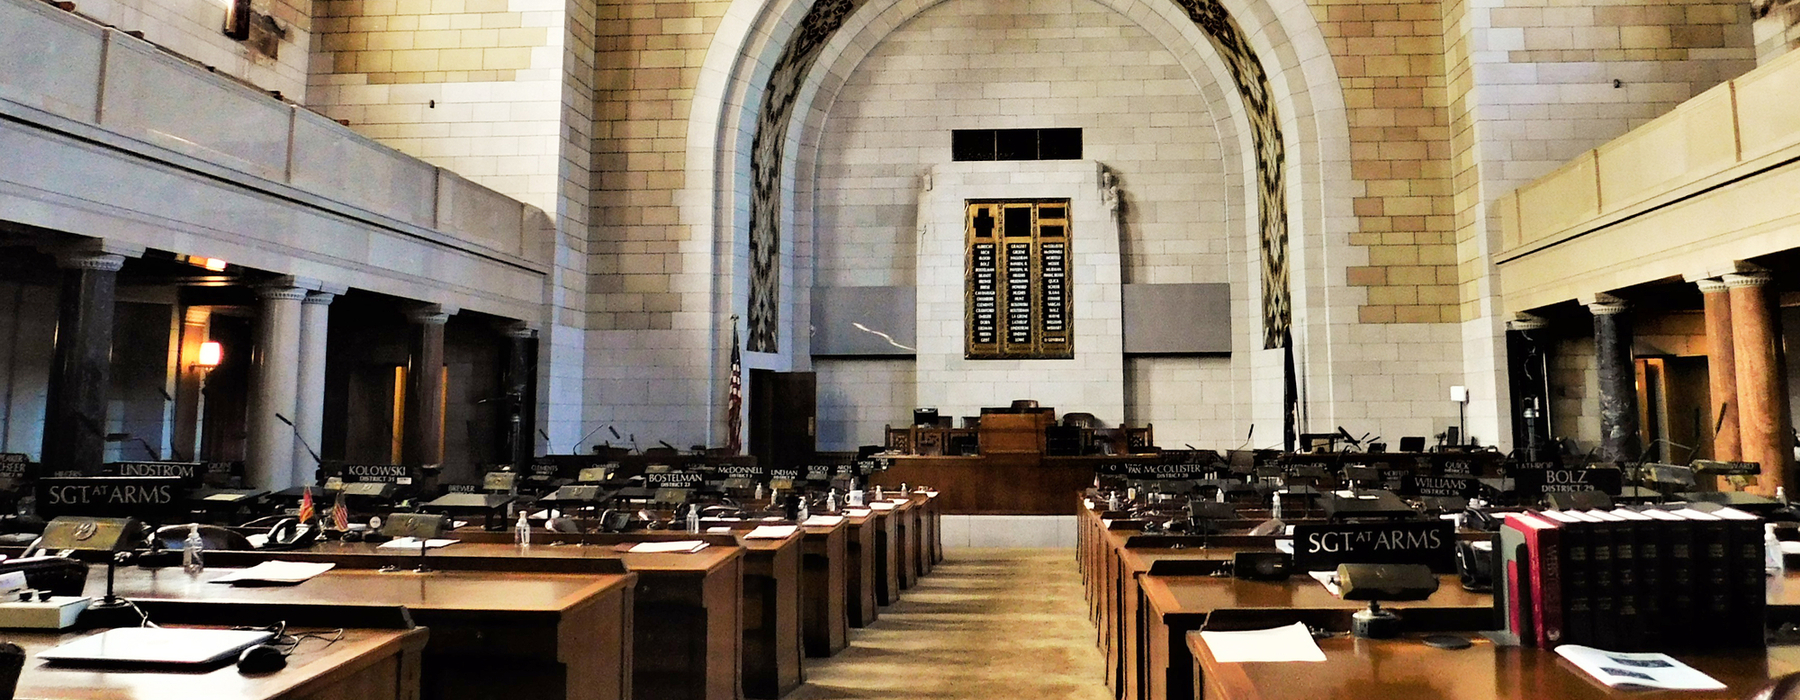 Inside the Nebraska Capitol building. Many tables and chairs with light brick walls.